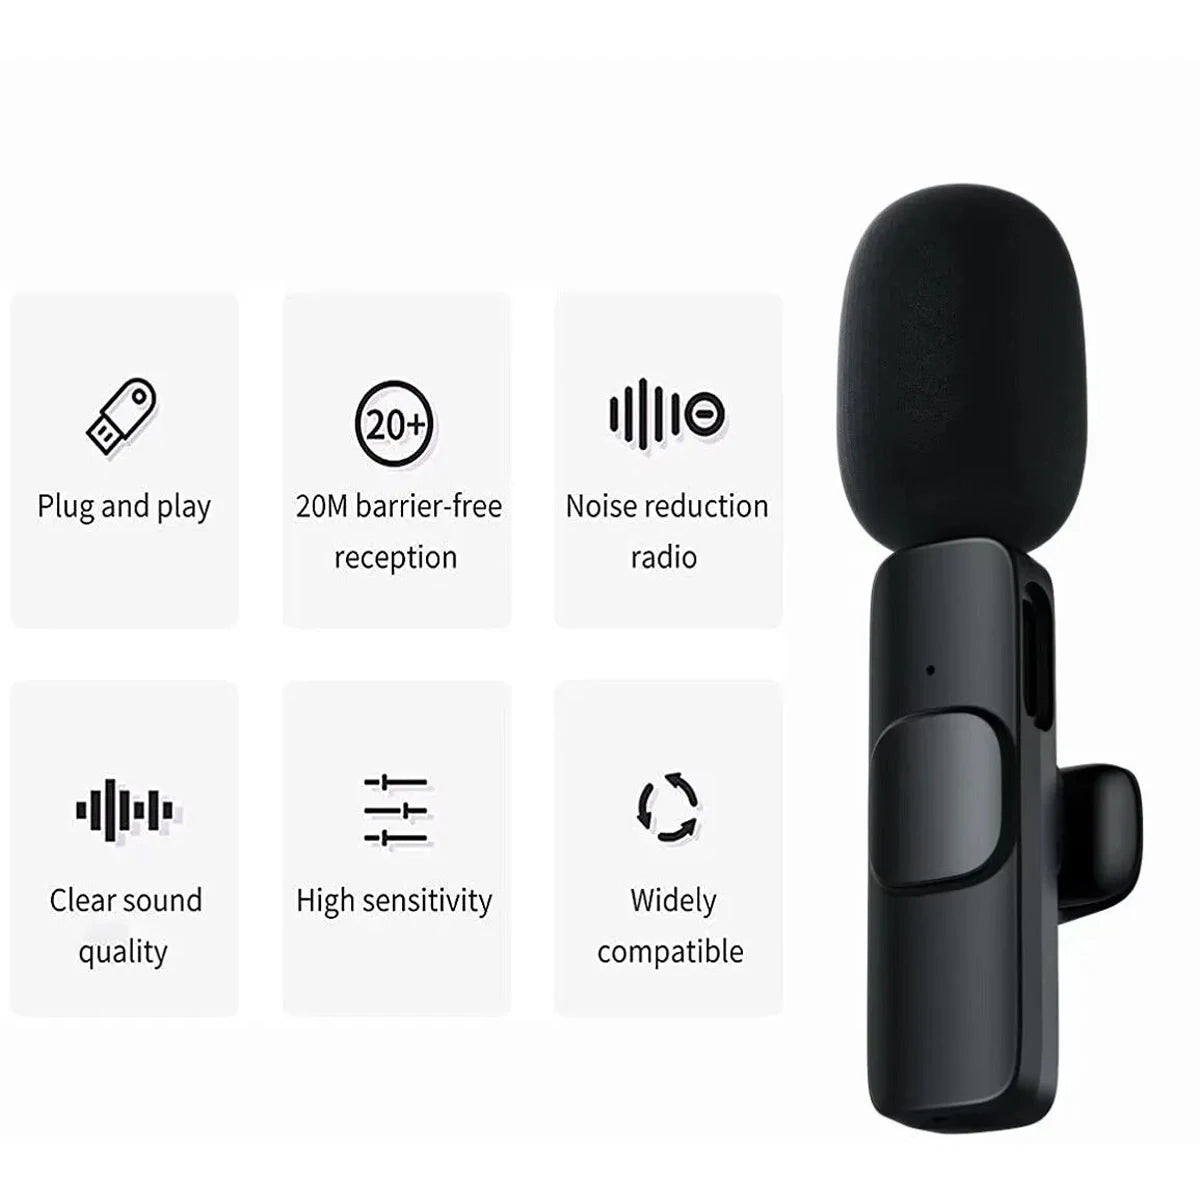 2.4g Wireless Bluetooth Lapel Microphone For iPhone iPad Audio Black S02 Luuk Young